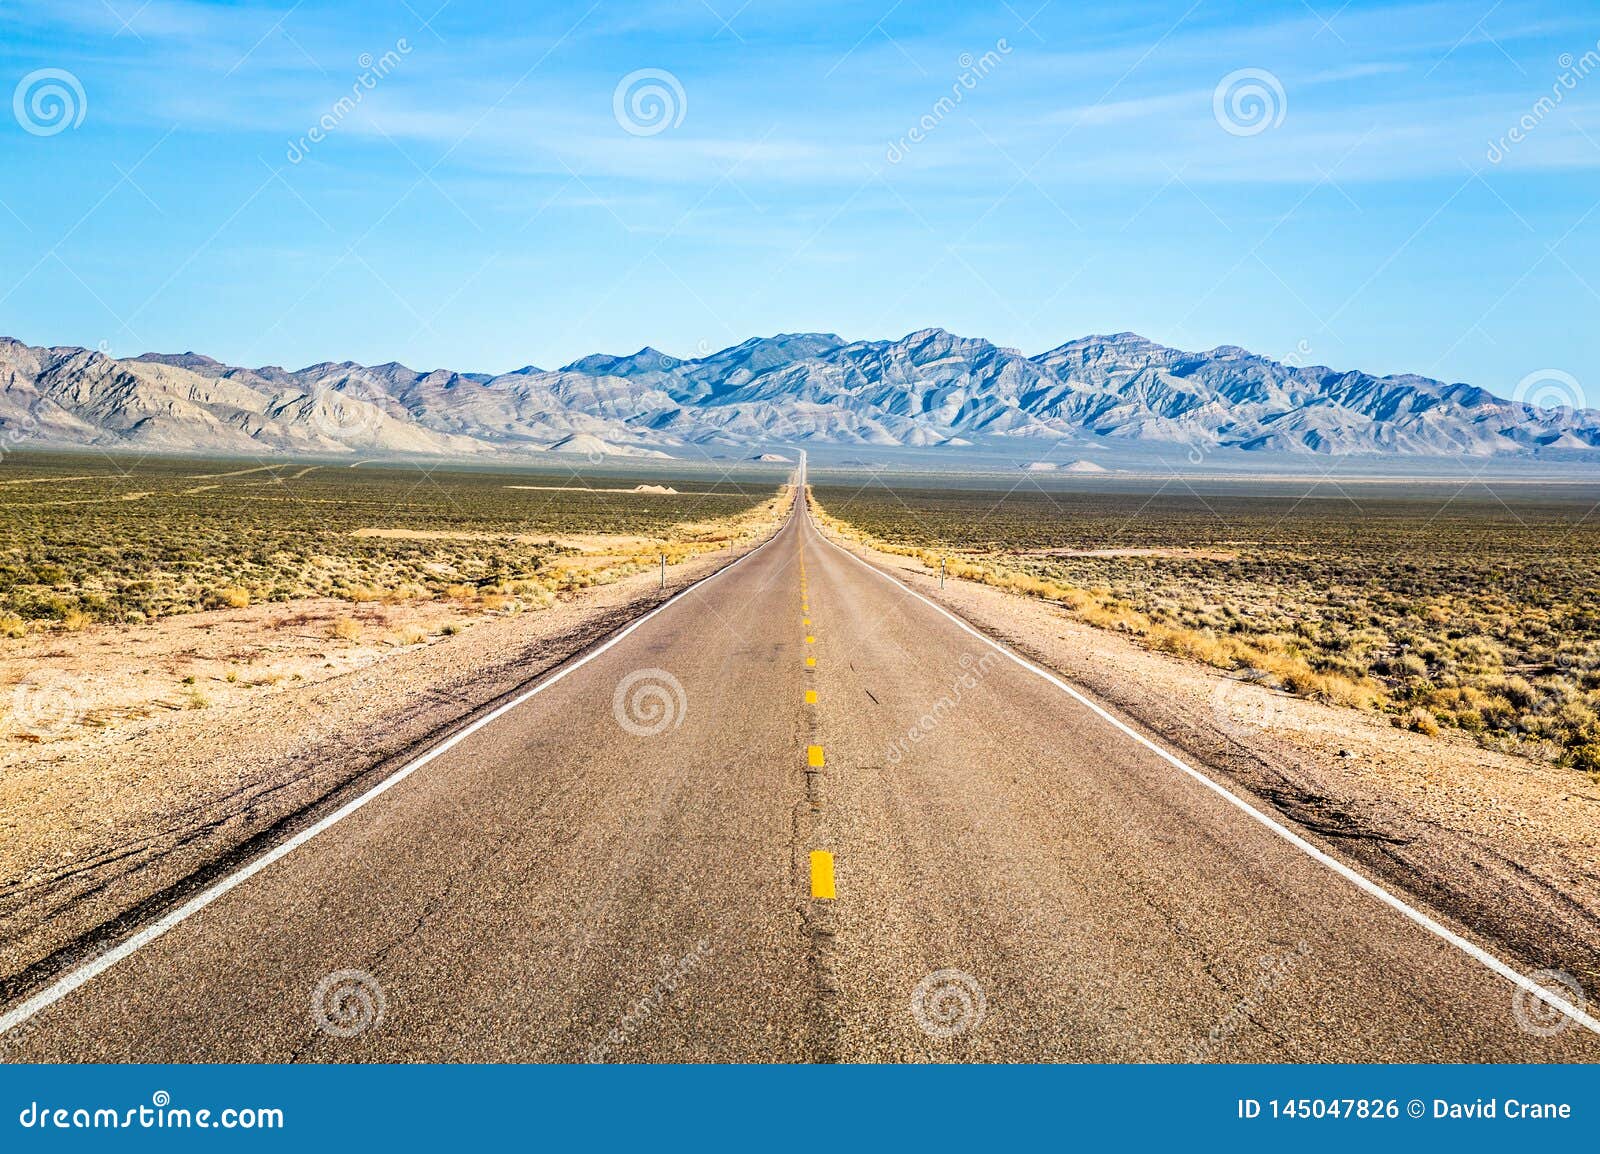 Wide Open Road and Distant Mountains in Wide Open Nevada Desert Along ...